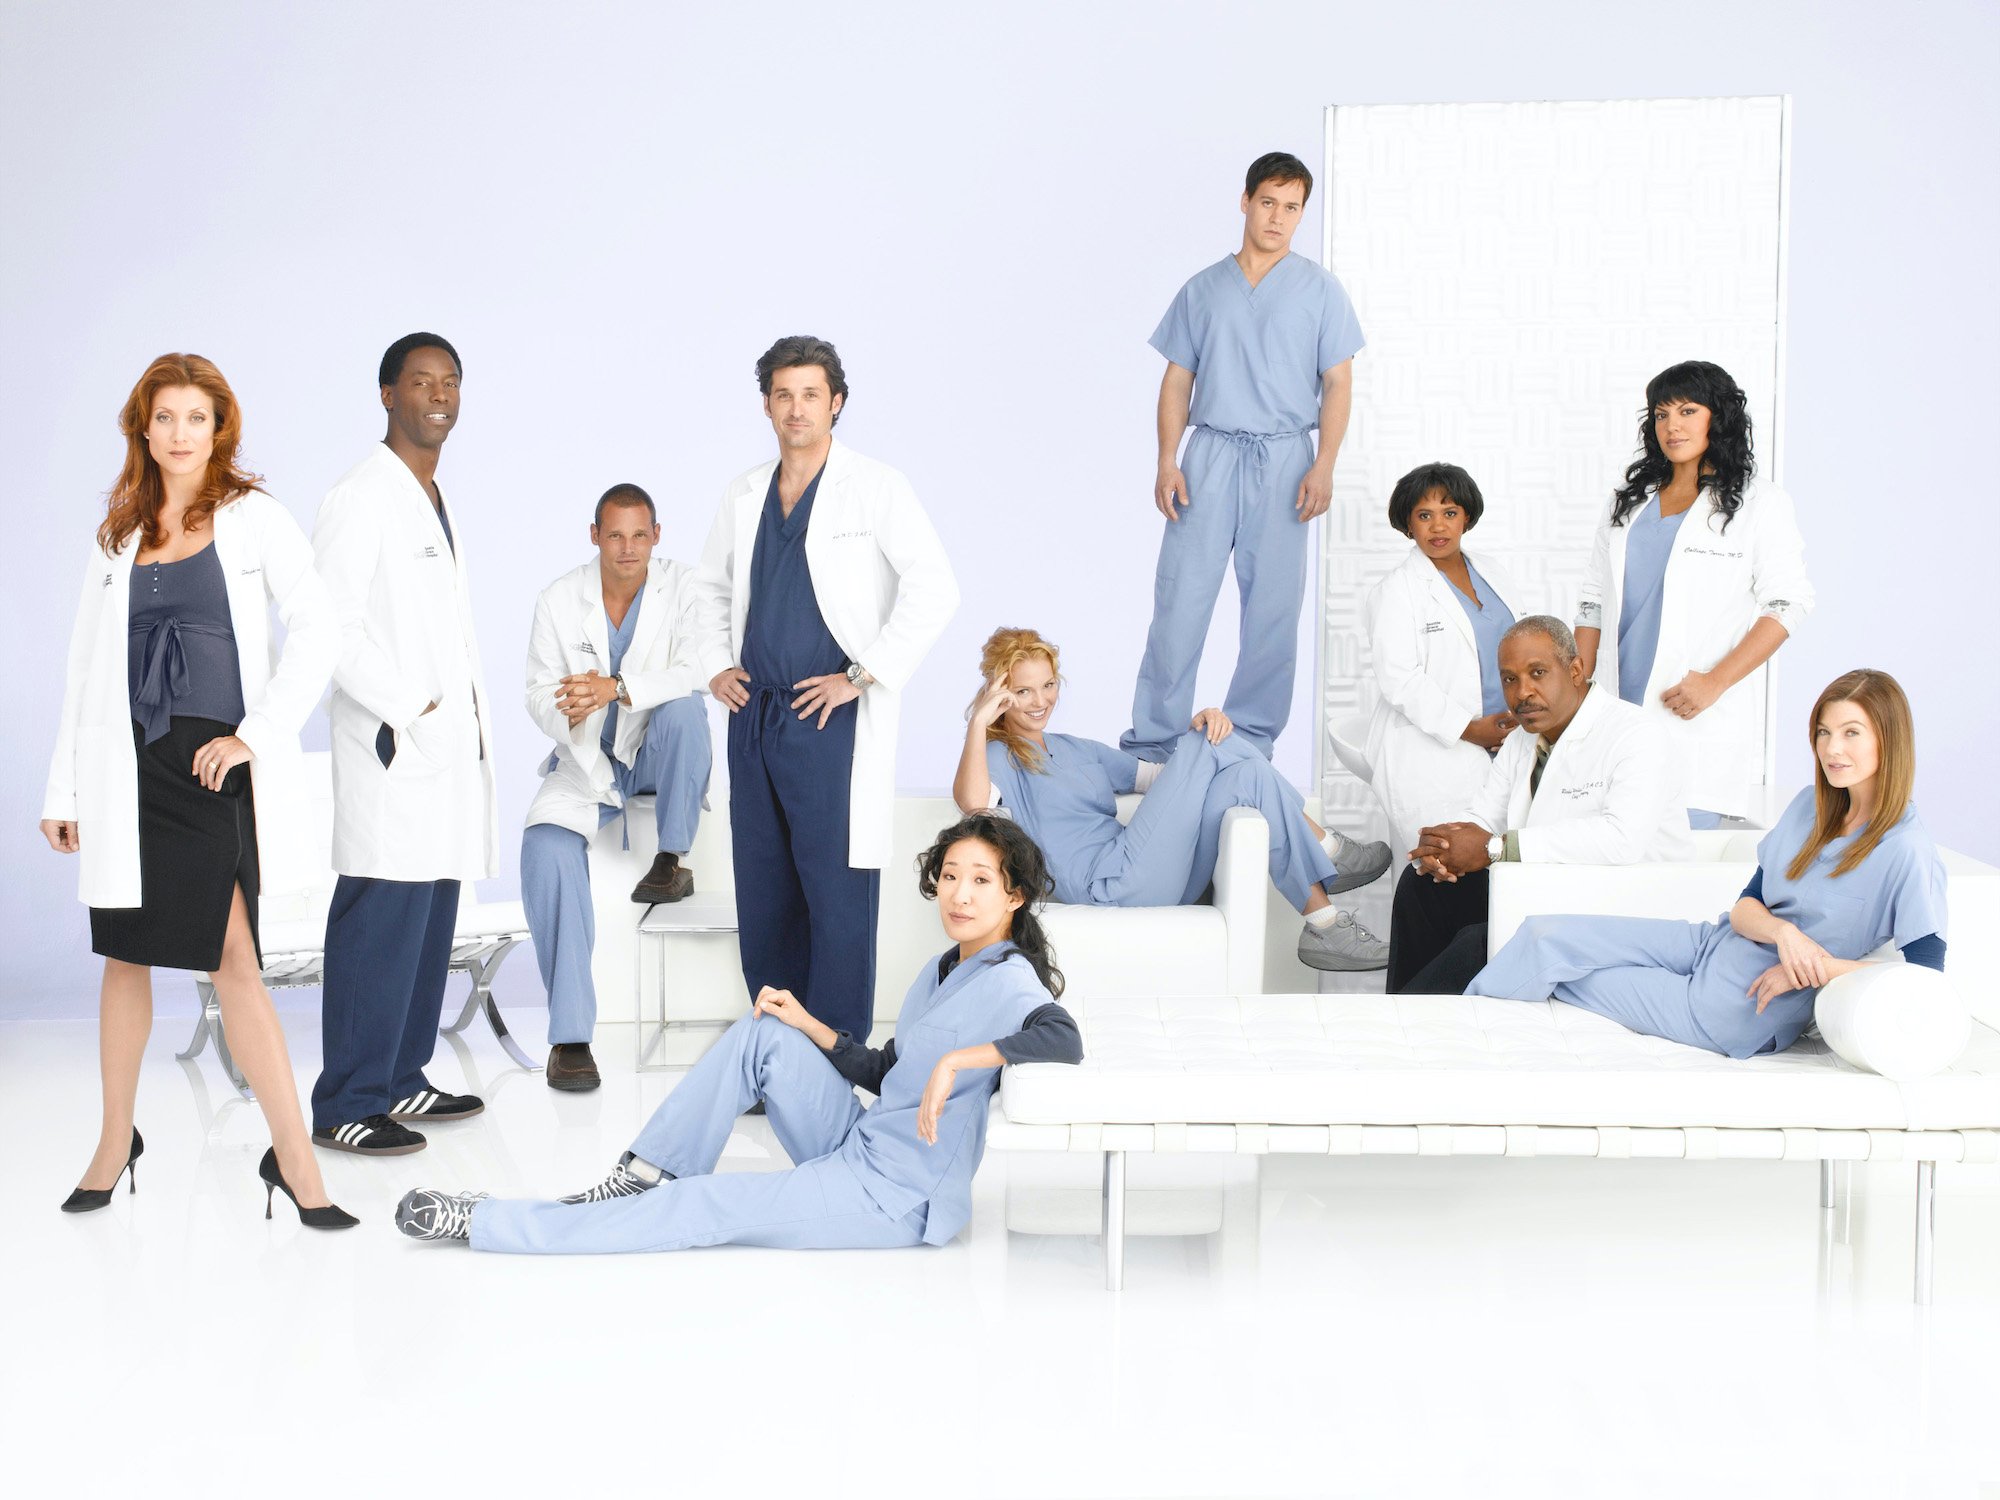 Was the Musical Episode of ‘Grey’s Anatomy’ Really That Bad?